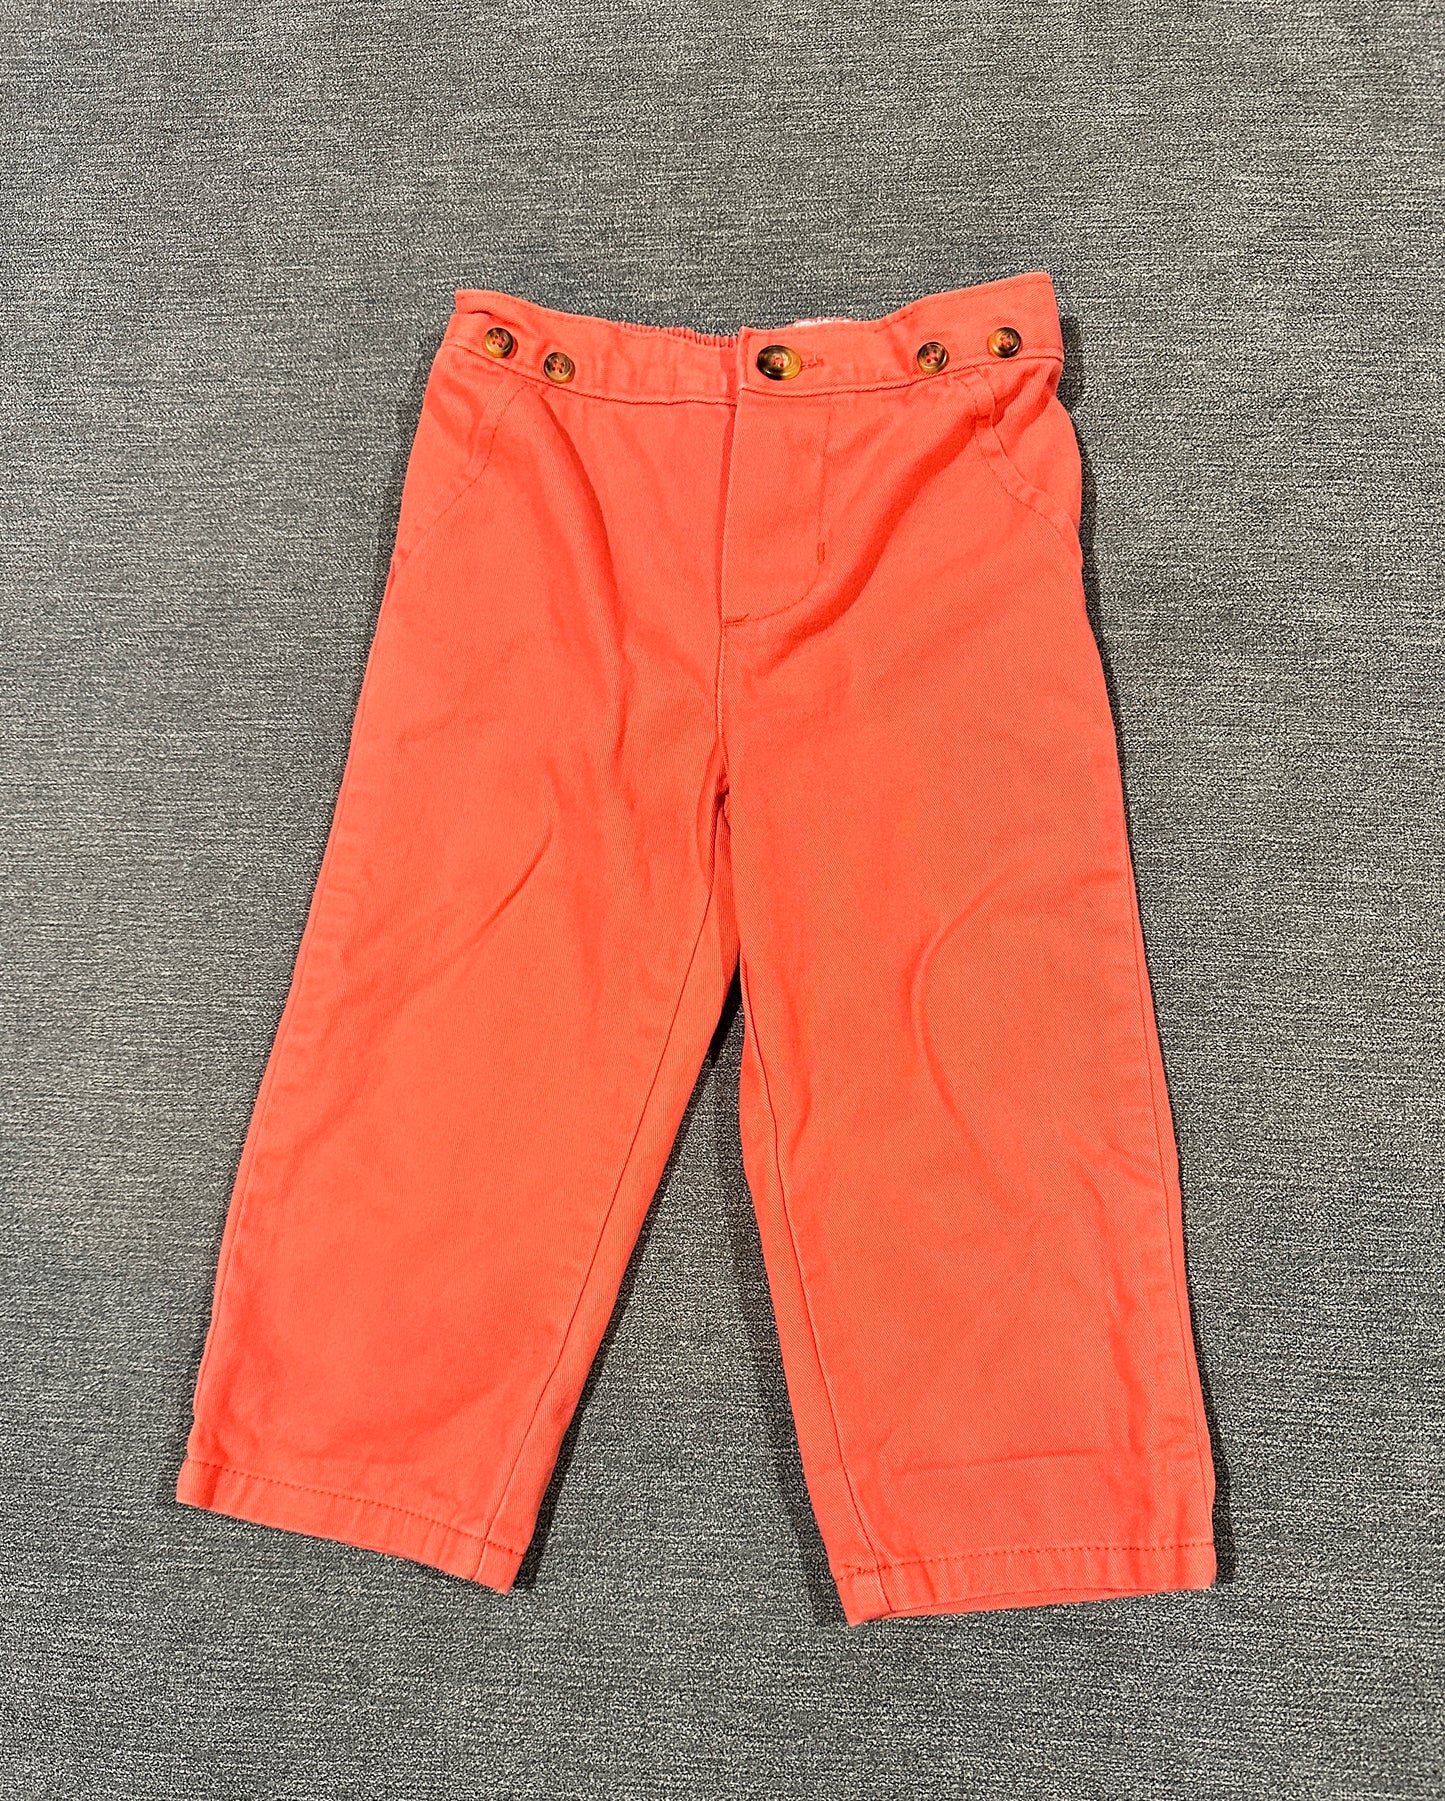 Boys 18 months, salmon dress pants with suspenders & bow tie , Joy by Carter’s